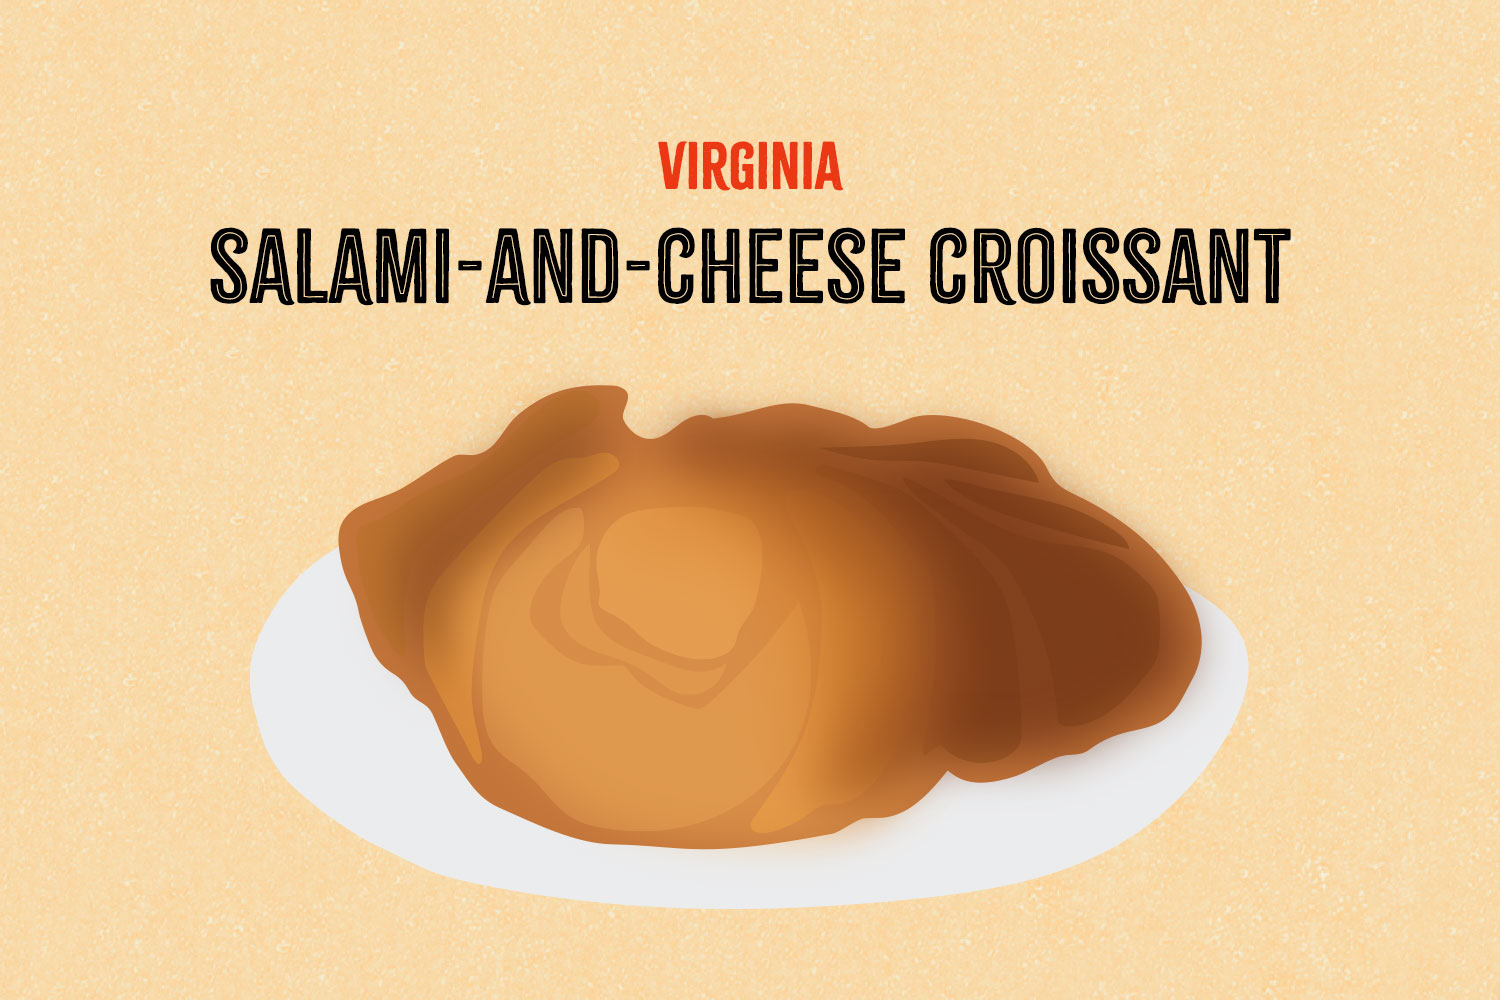 Salami-and-cheese croissant illustration